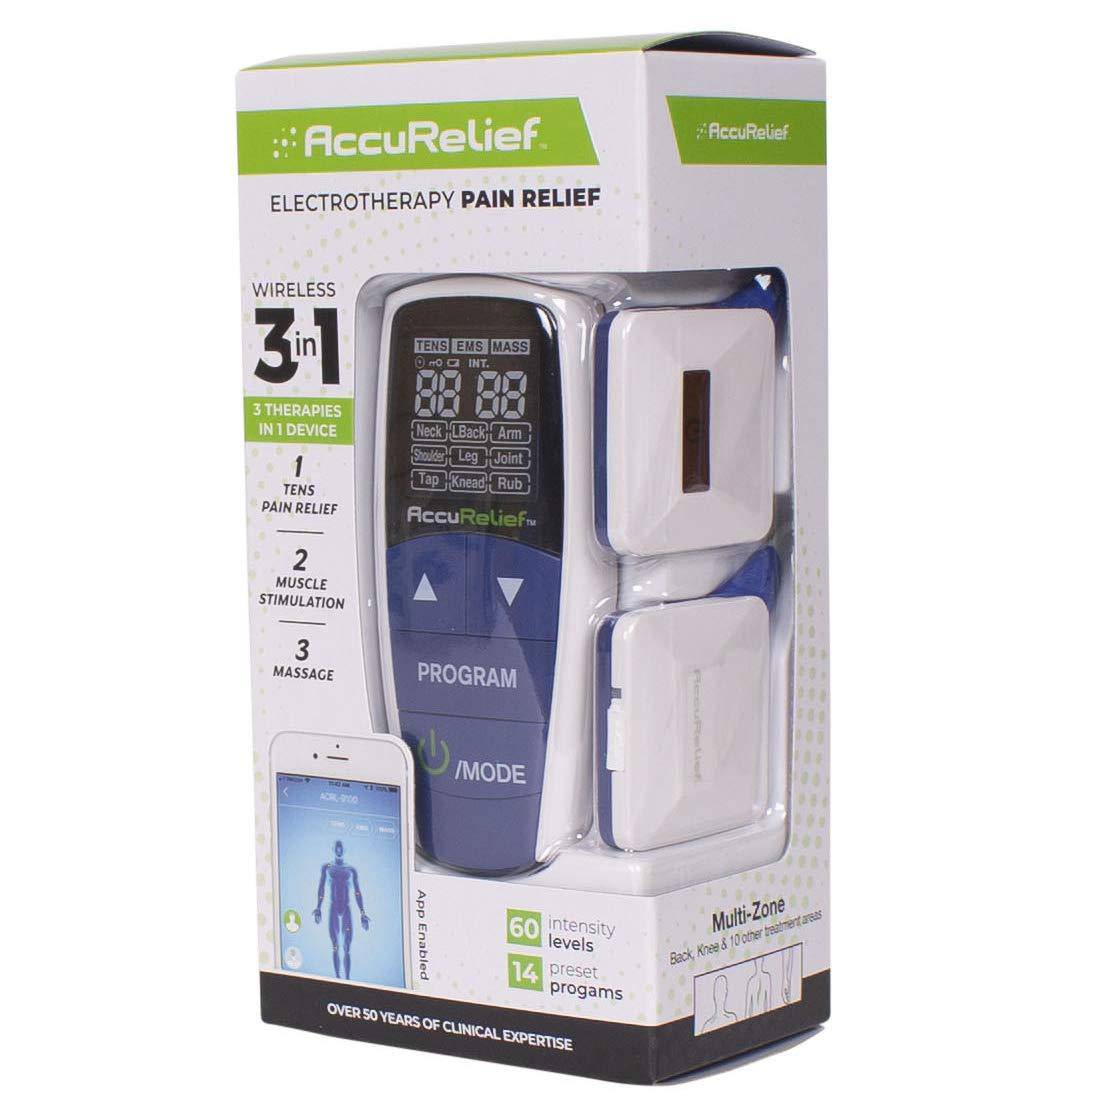 AccuRelief Wireless TENS Electrotherapy Pain Relief System Supply Kit  (Packaging May Vary), Works with AccuRelief Wireless Remote Control TENS  Device